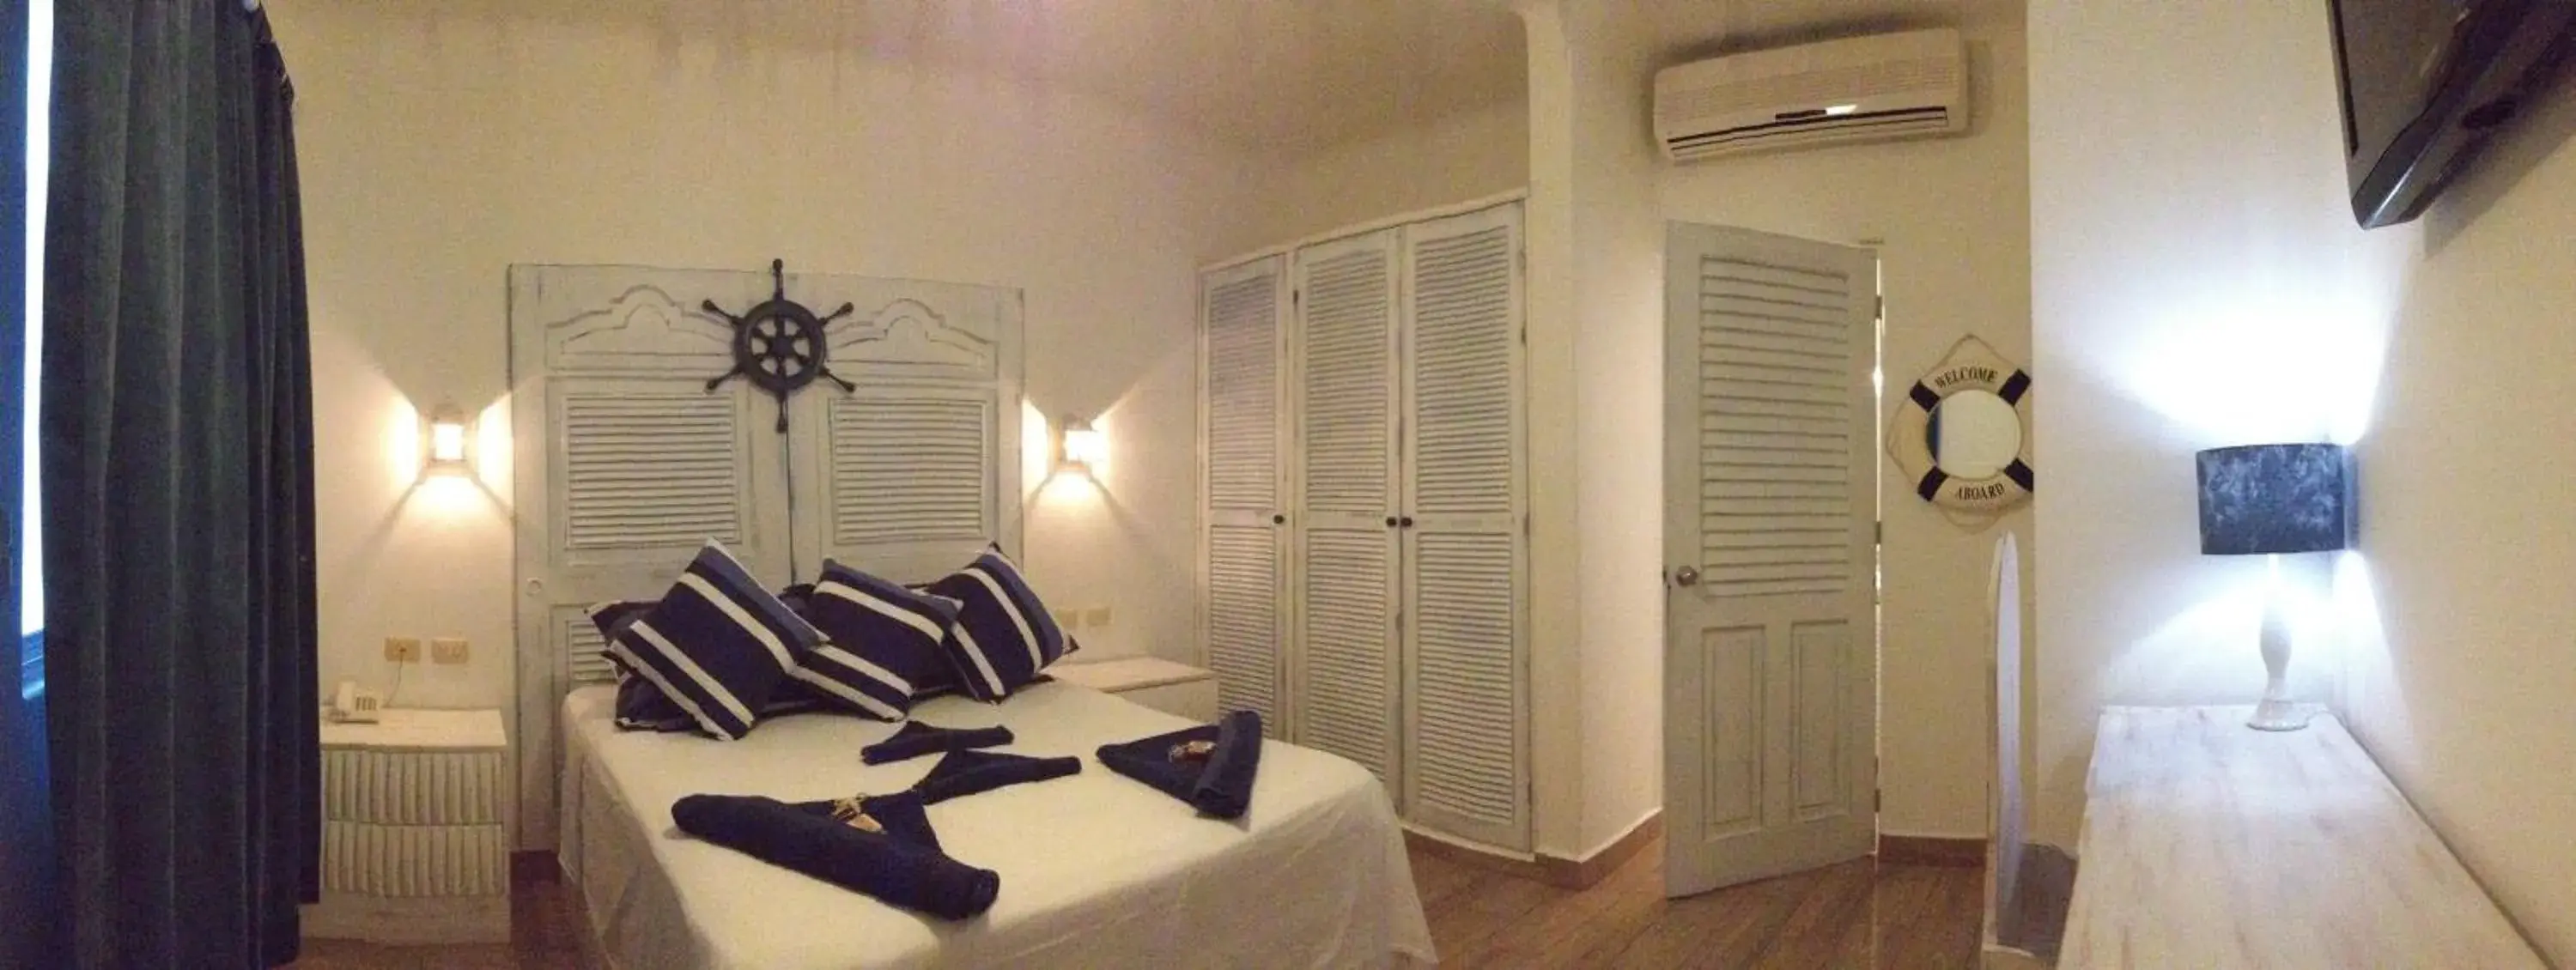 Standard Double Room in Hotel Coco Rio by Hospitality Wellbeing